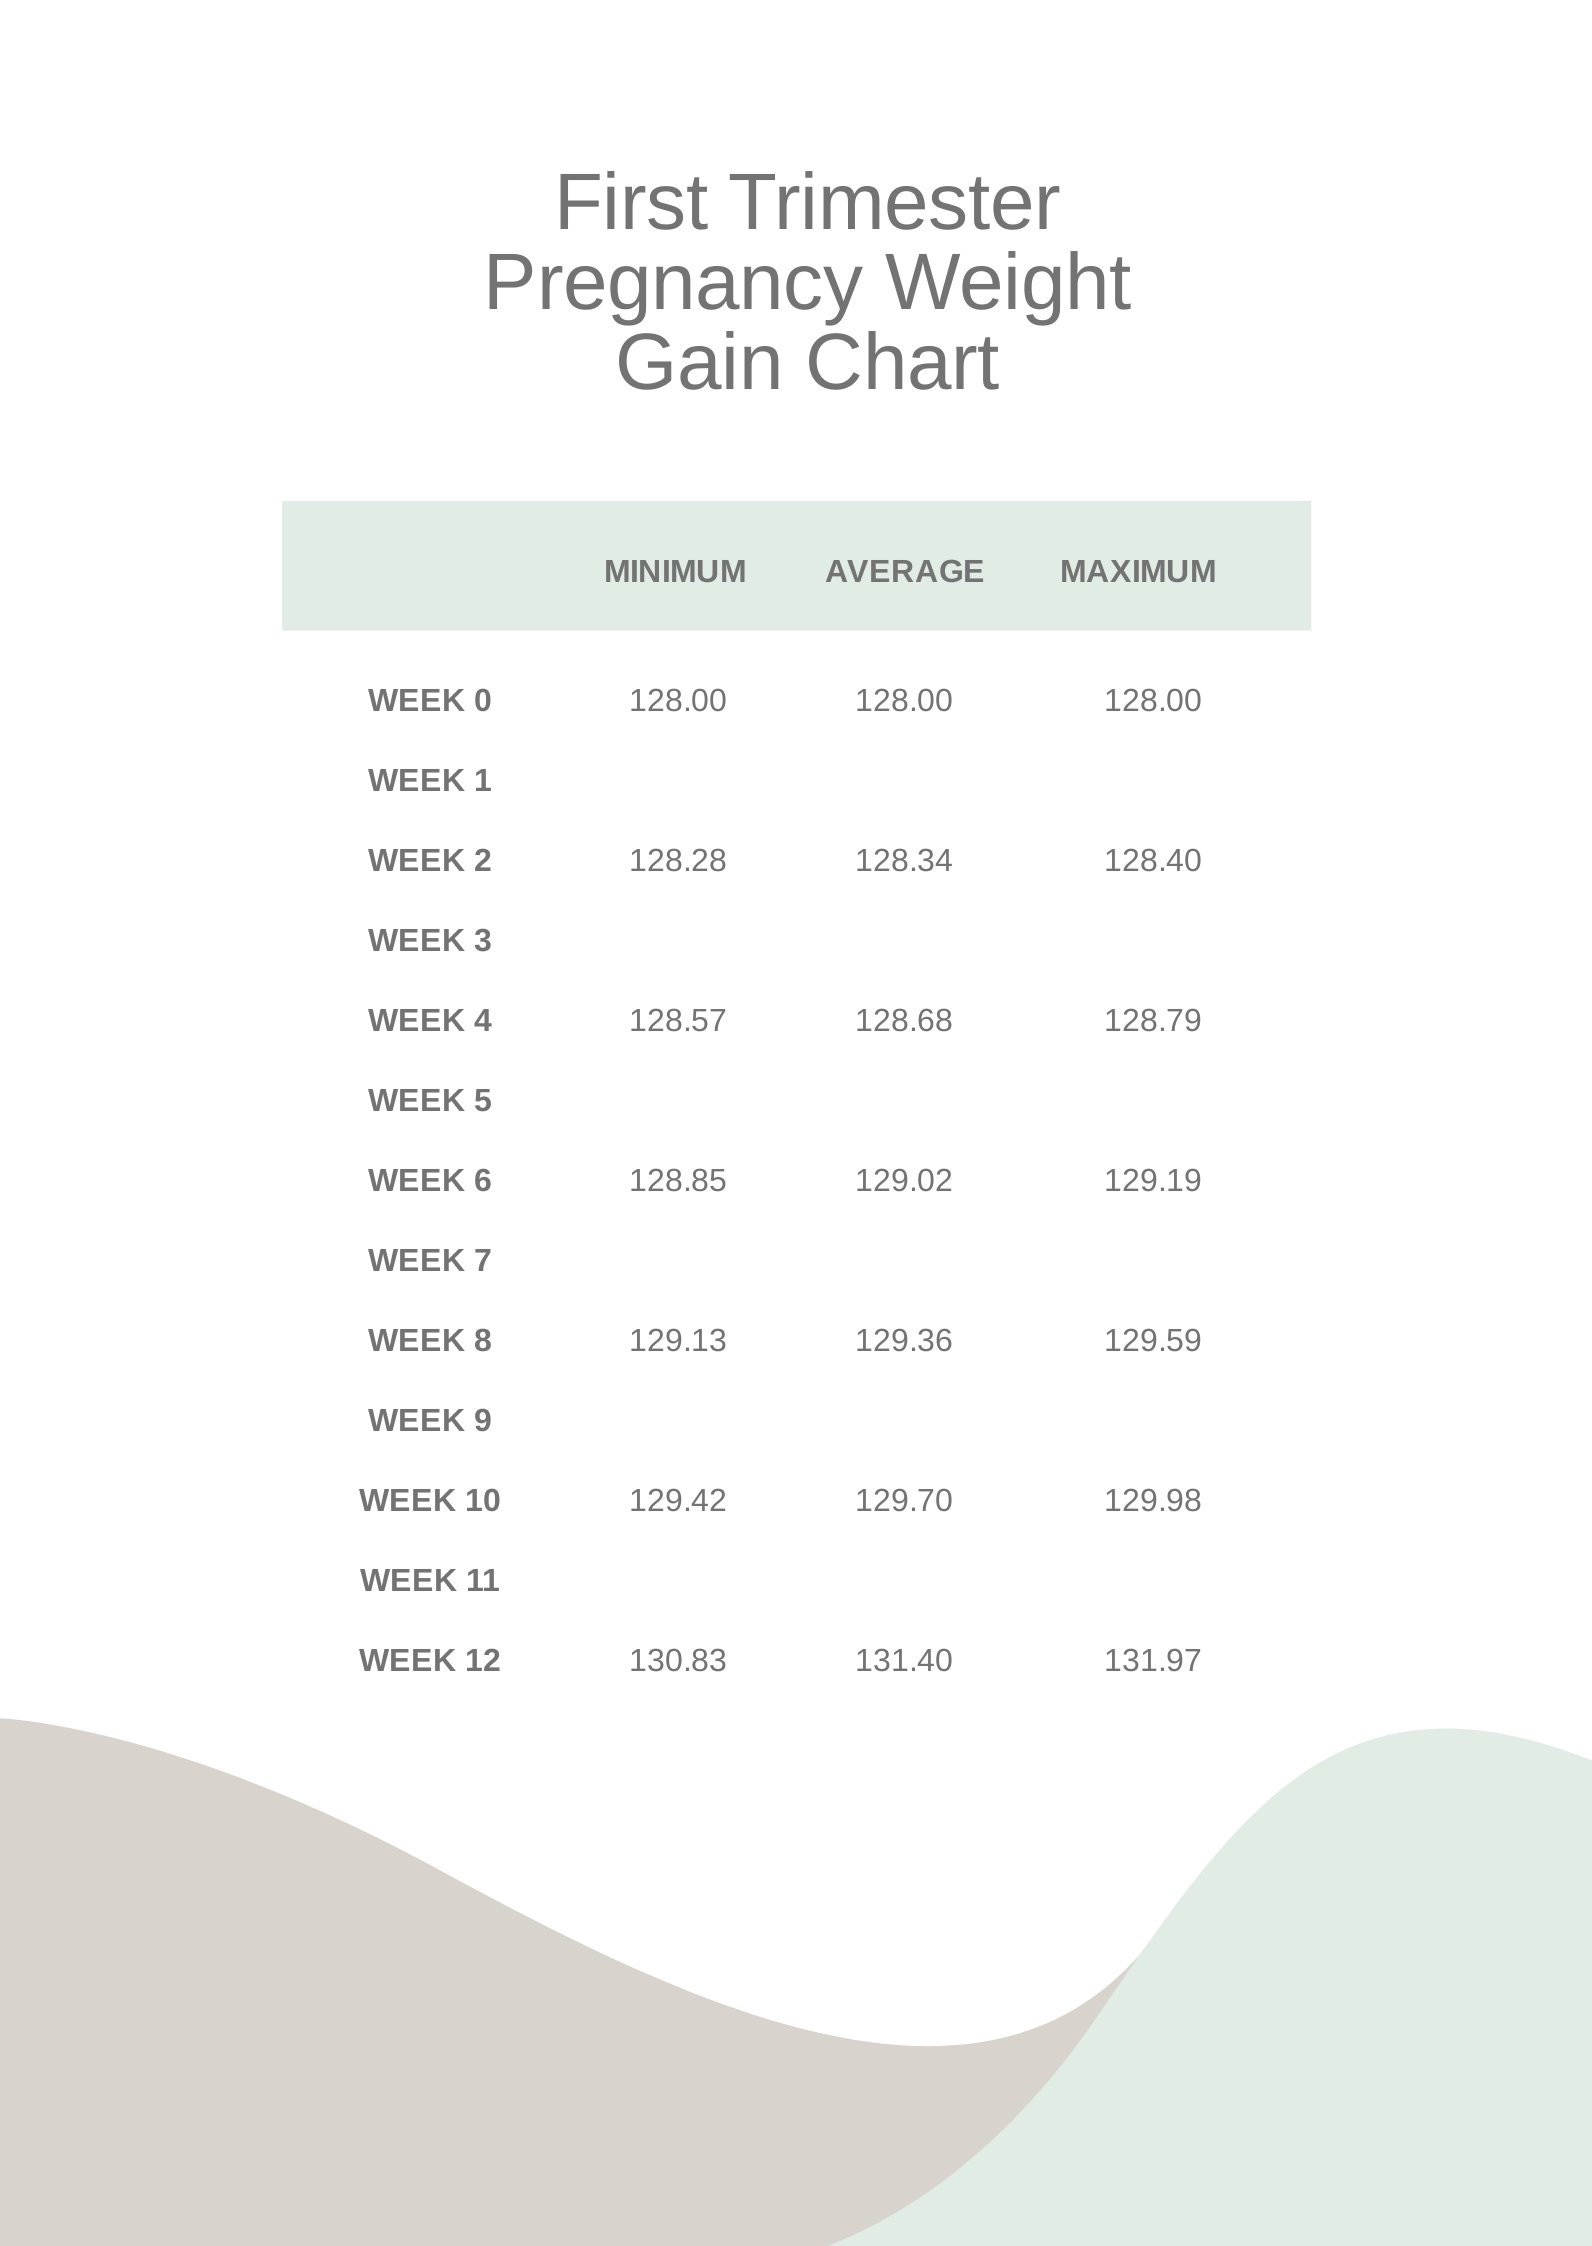 First Trimester Pregnancy Weight Gain Chart in PDF